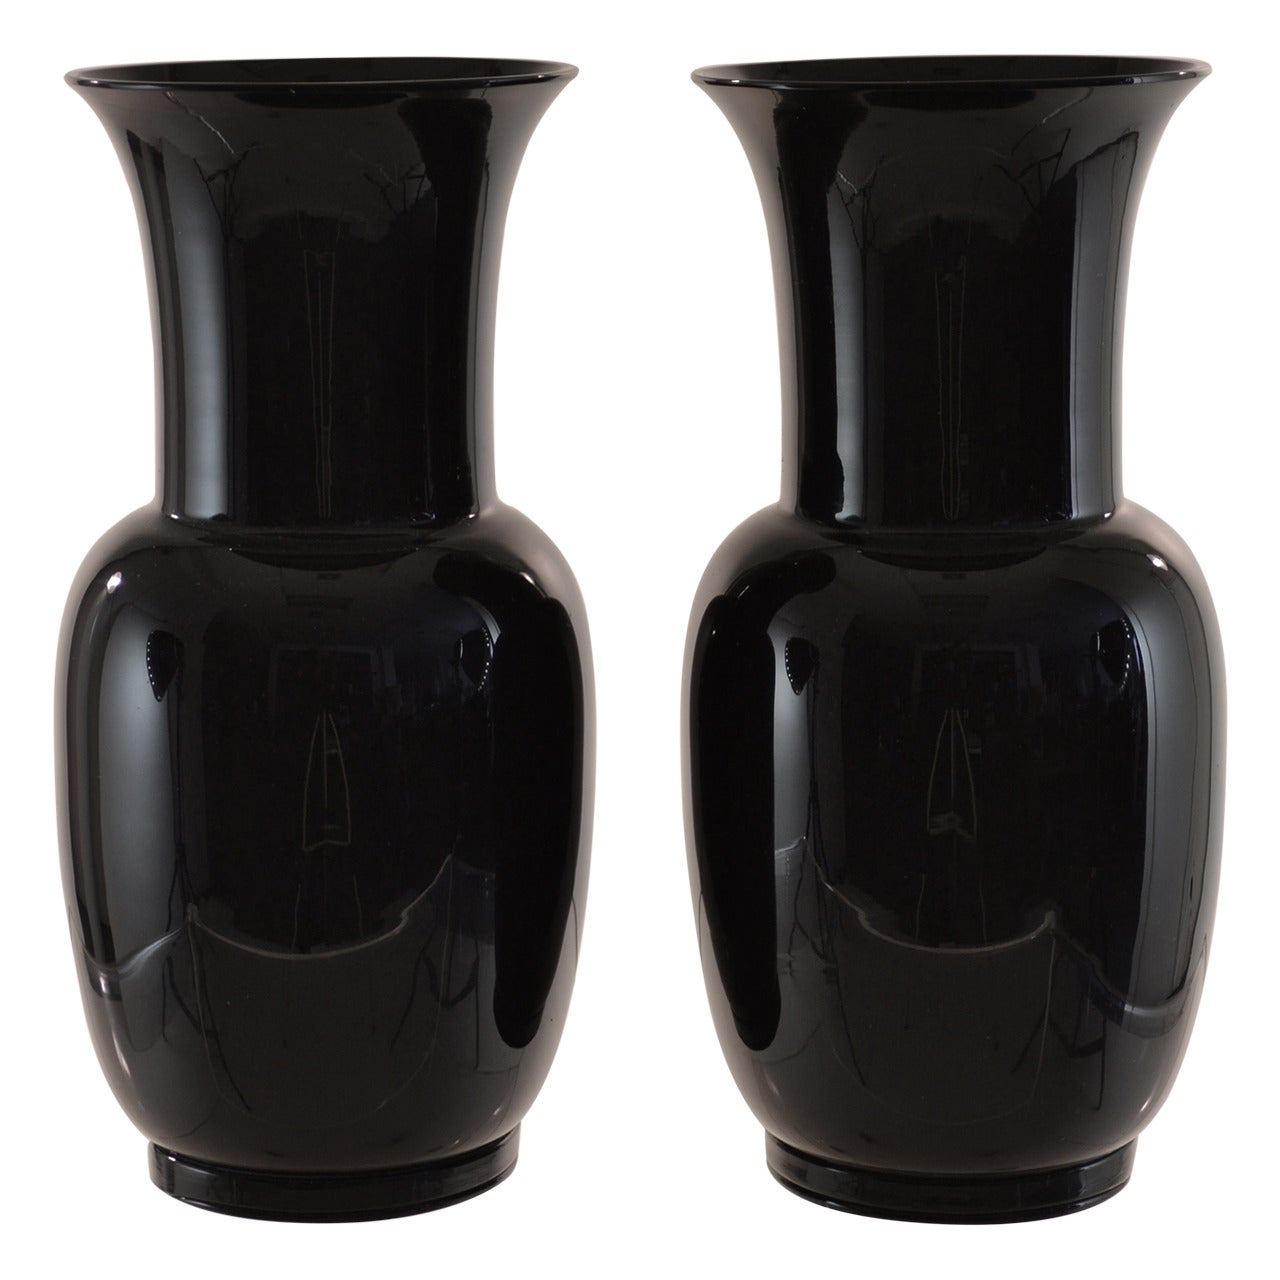 Venini, Pair of Signed Black Glass Urns, dated 1978